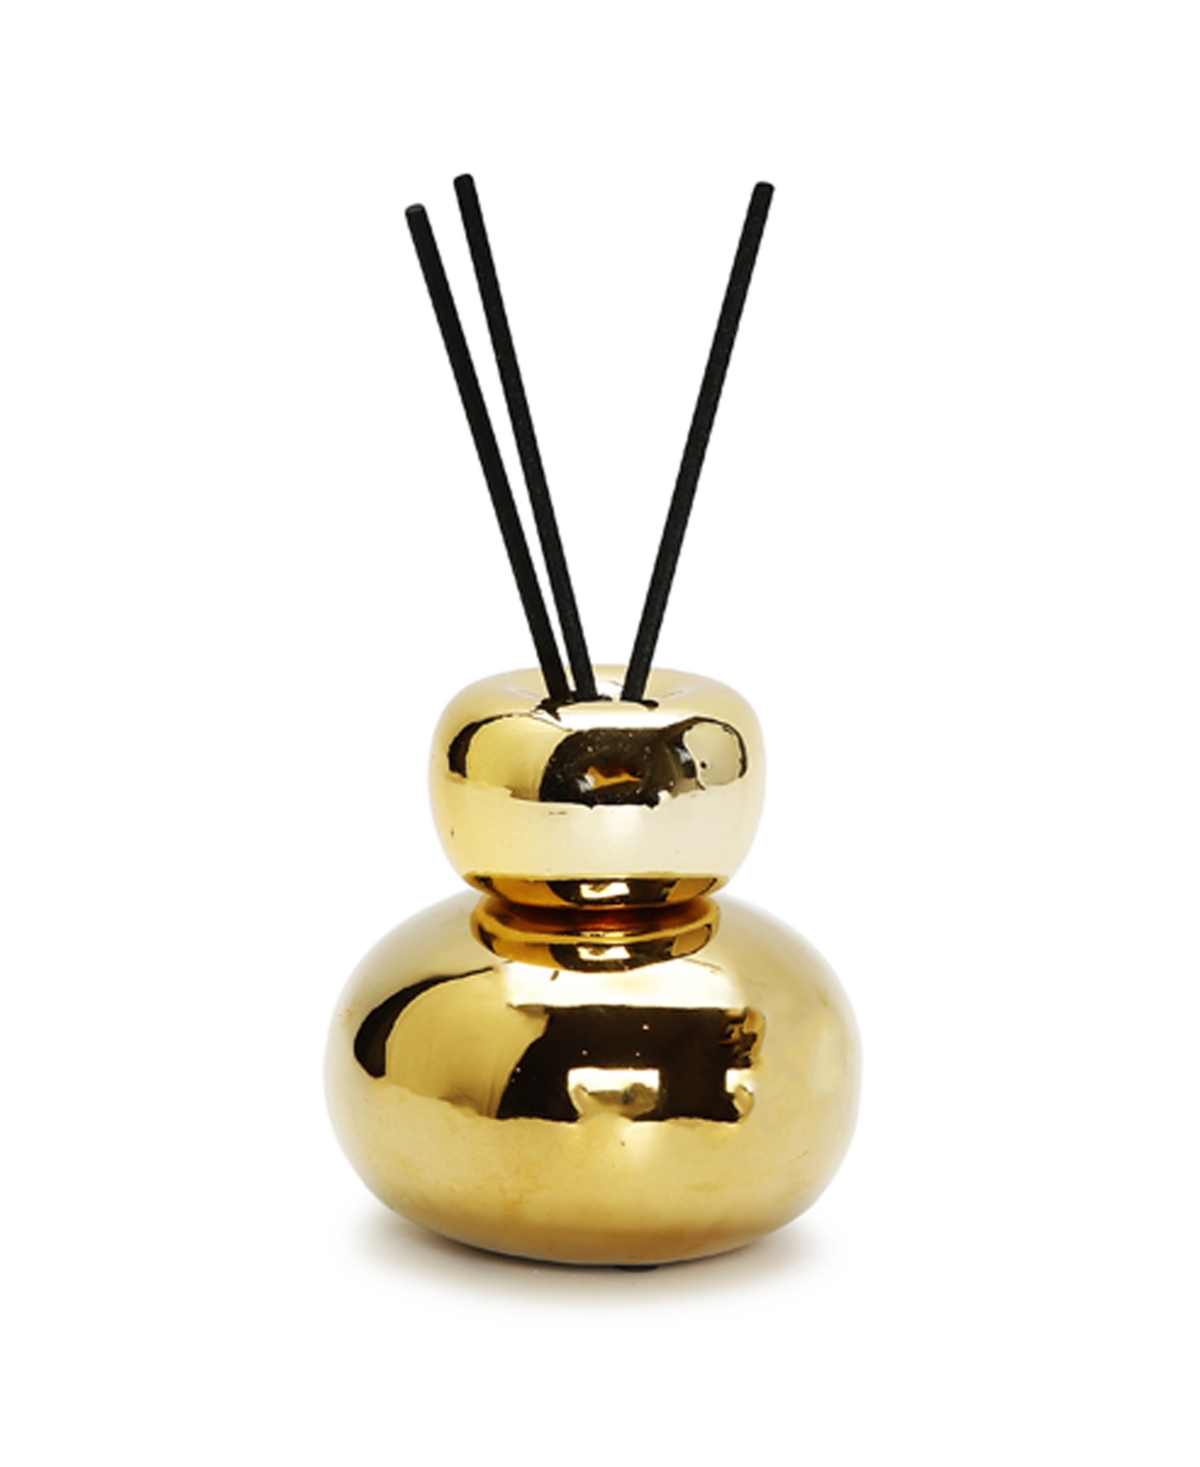 Gold-Tone Round Reed Diffuser, "Lilly of the Valley" Scent - Gold